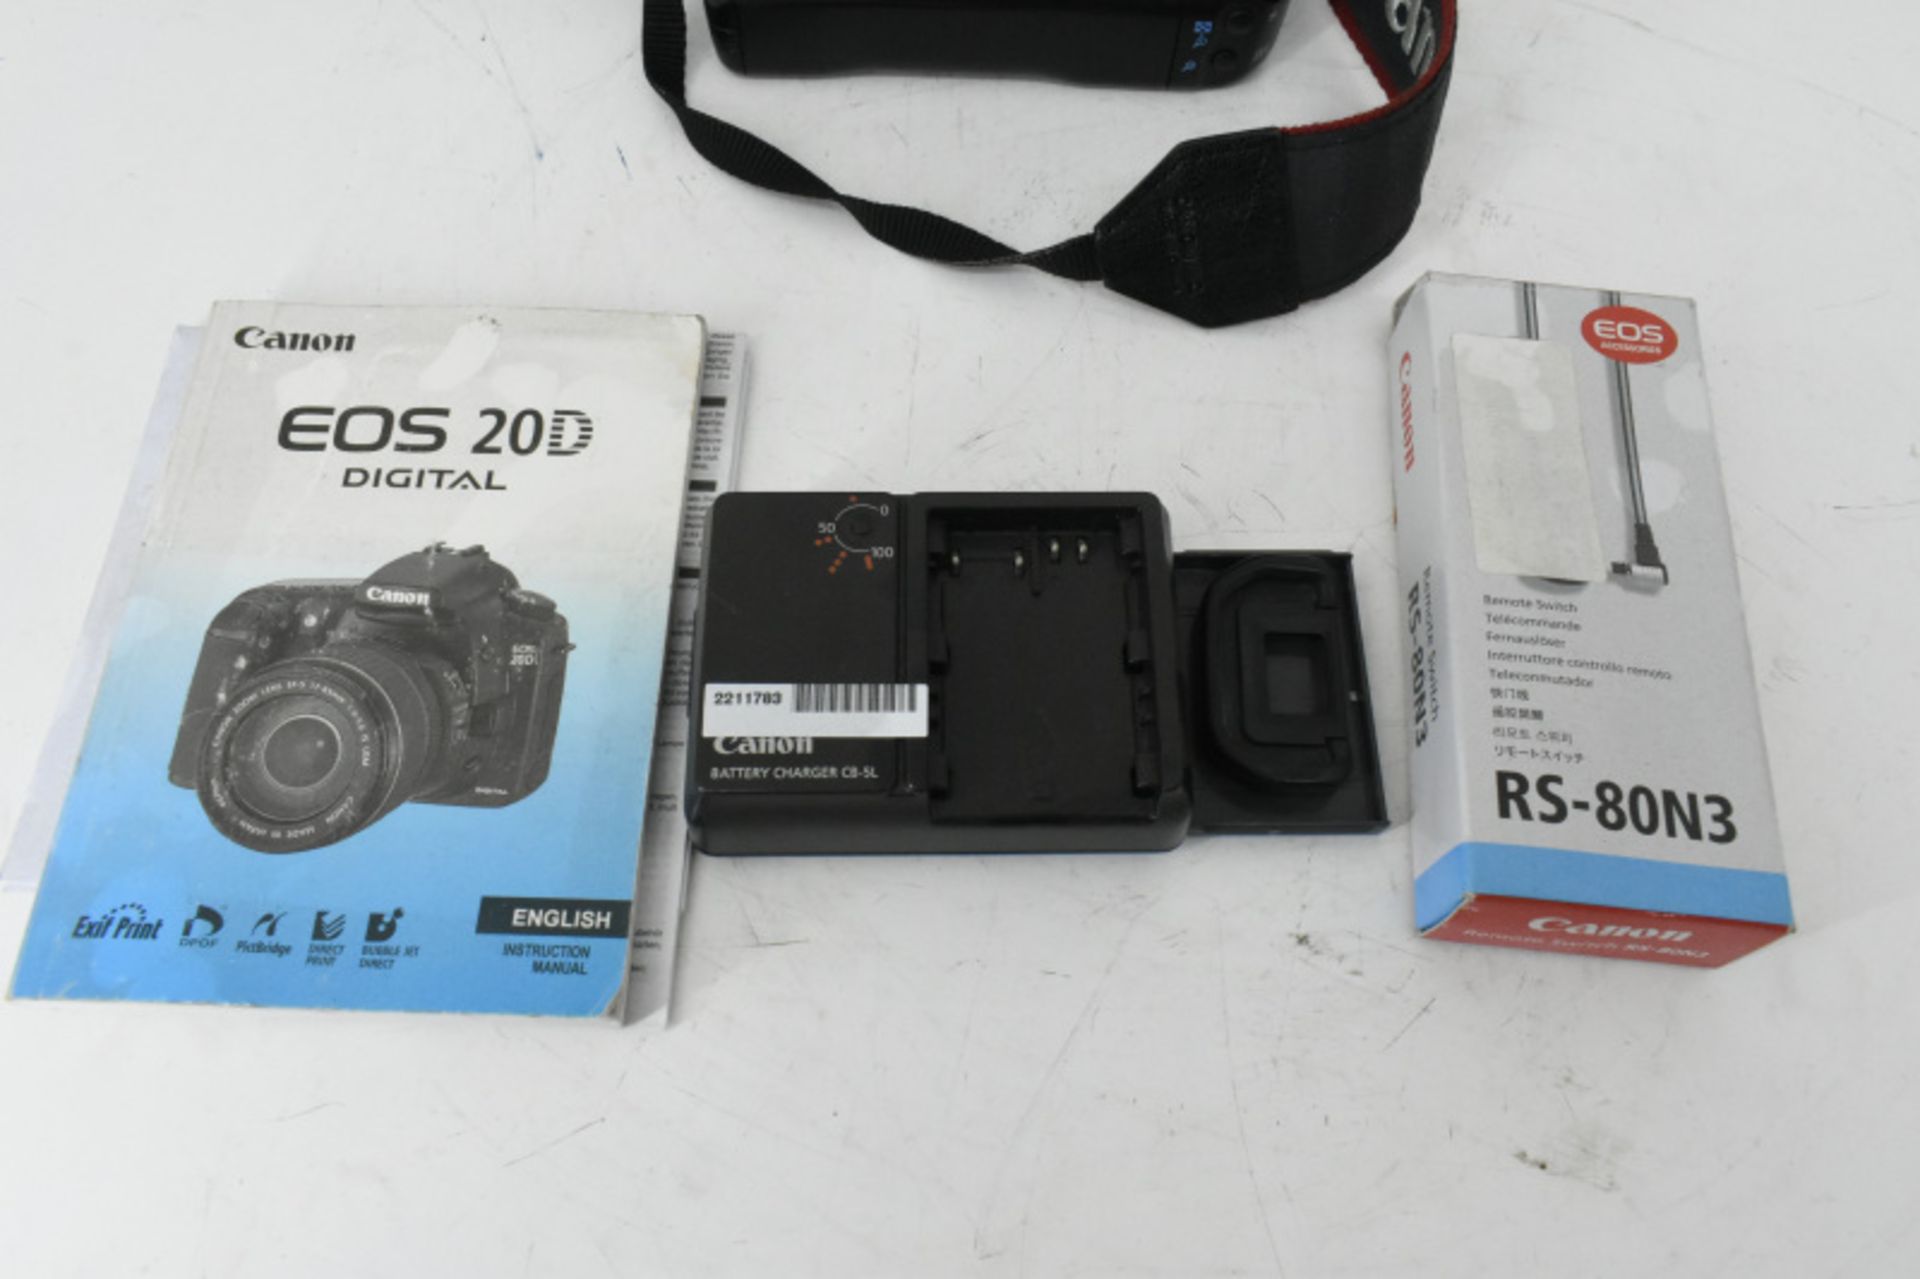 Canon EOS 20D DS126061 digital camera with accessories - Image 4 of 4